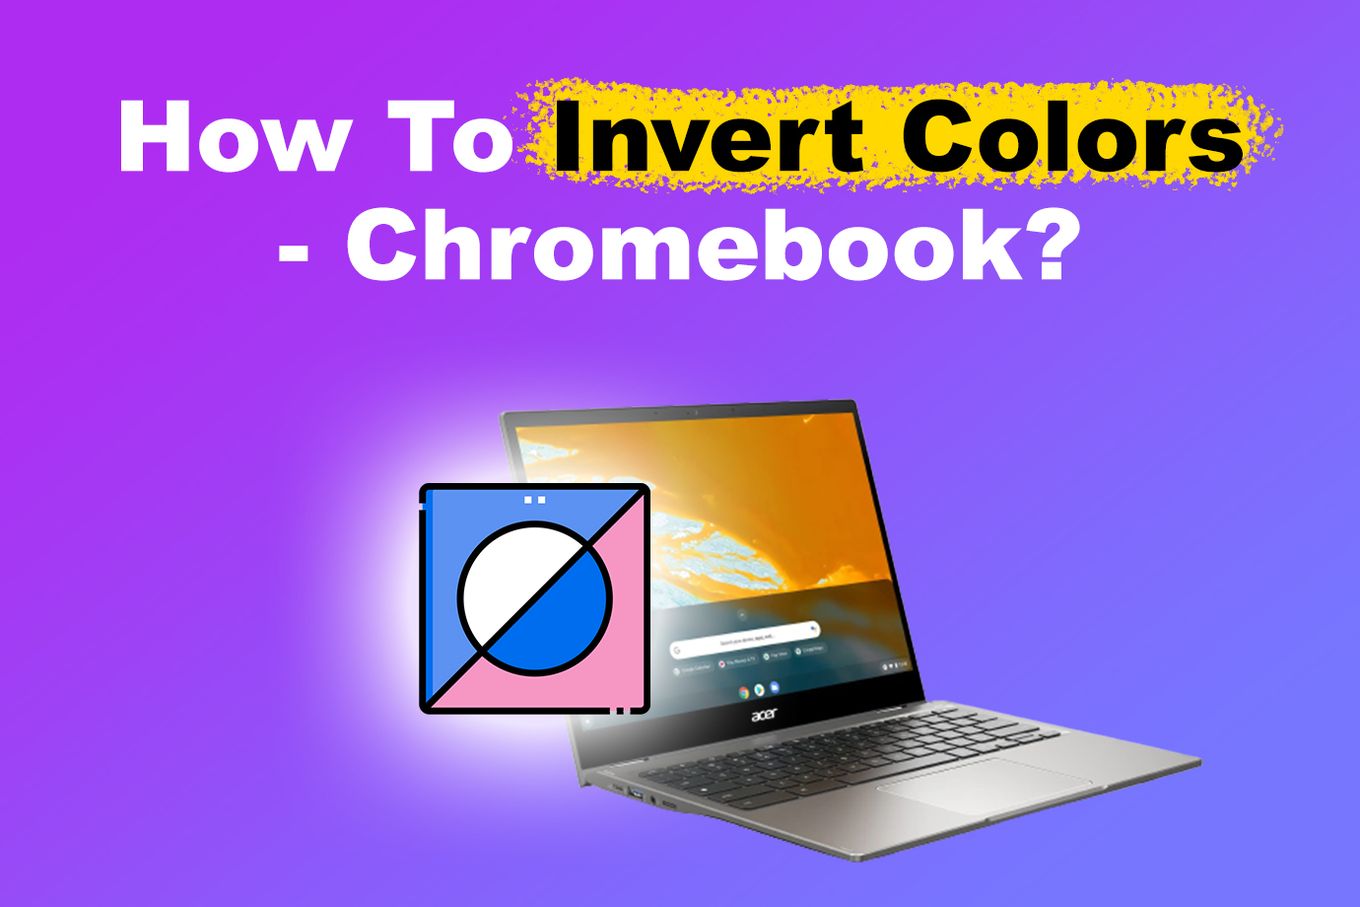 How to Invert Colors on Chromebook - Free PC Tech